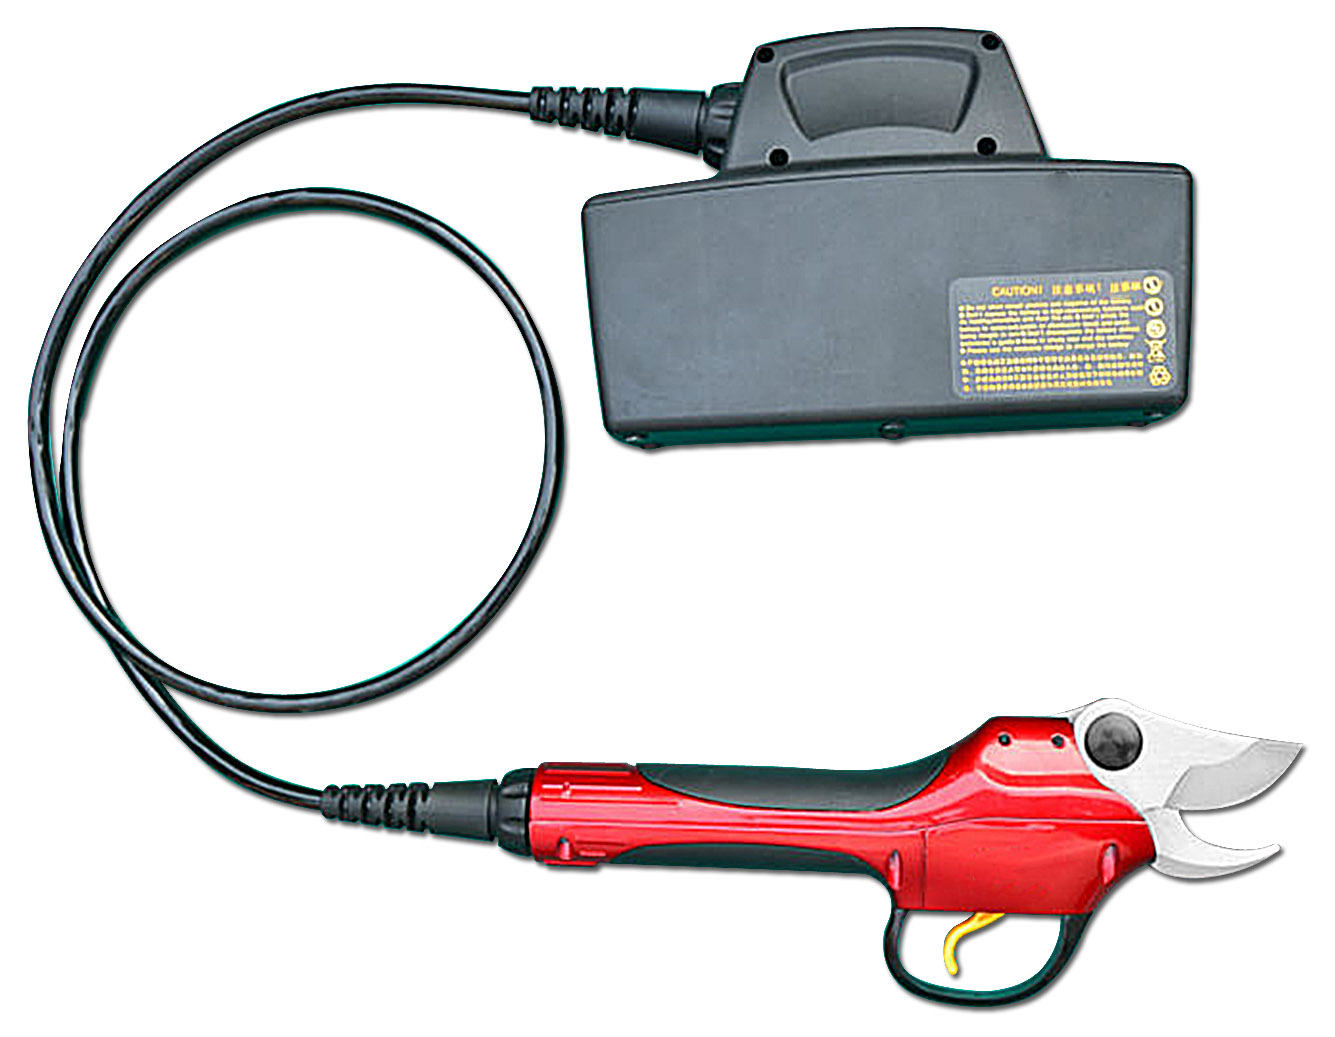 Zenport SCA Repair Half-Hour Service for Battery Powered Electric Shears - Click Image to Close